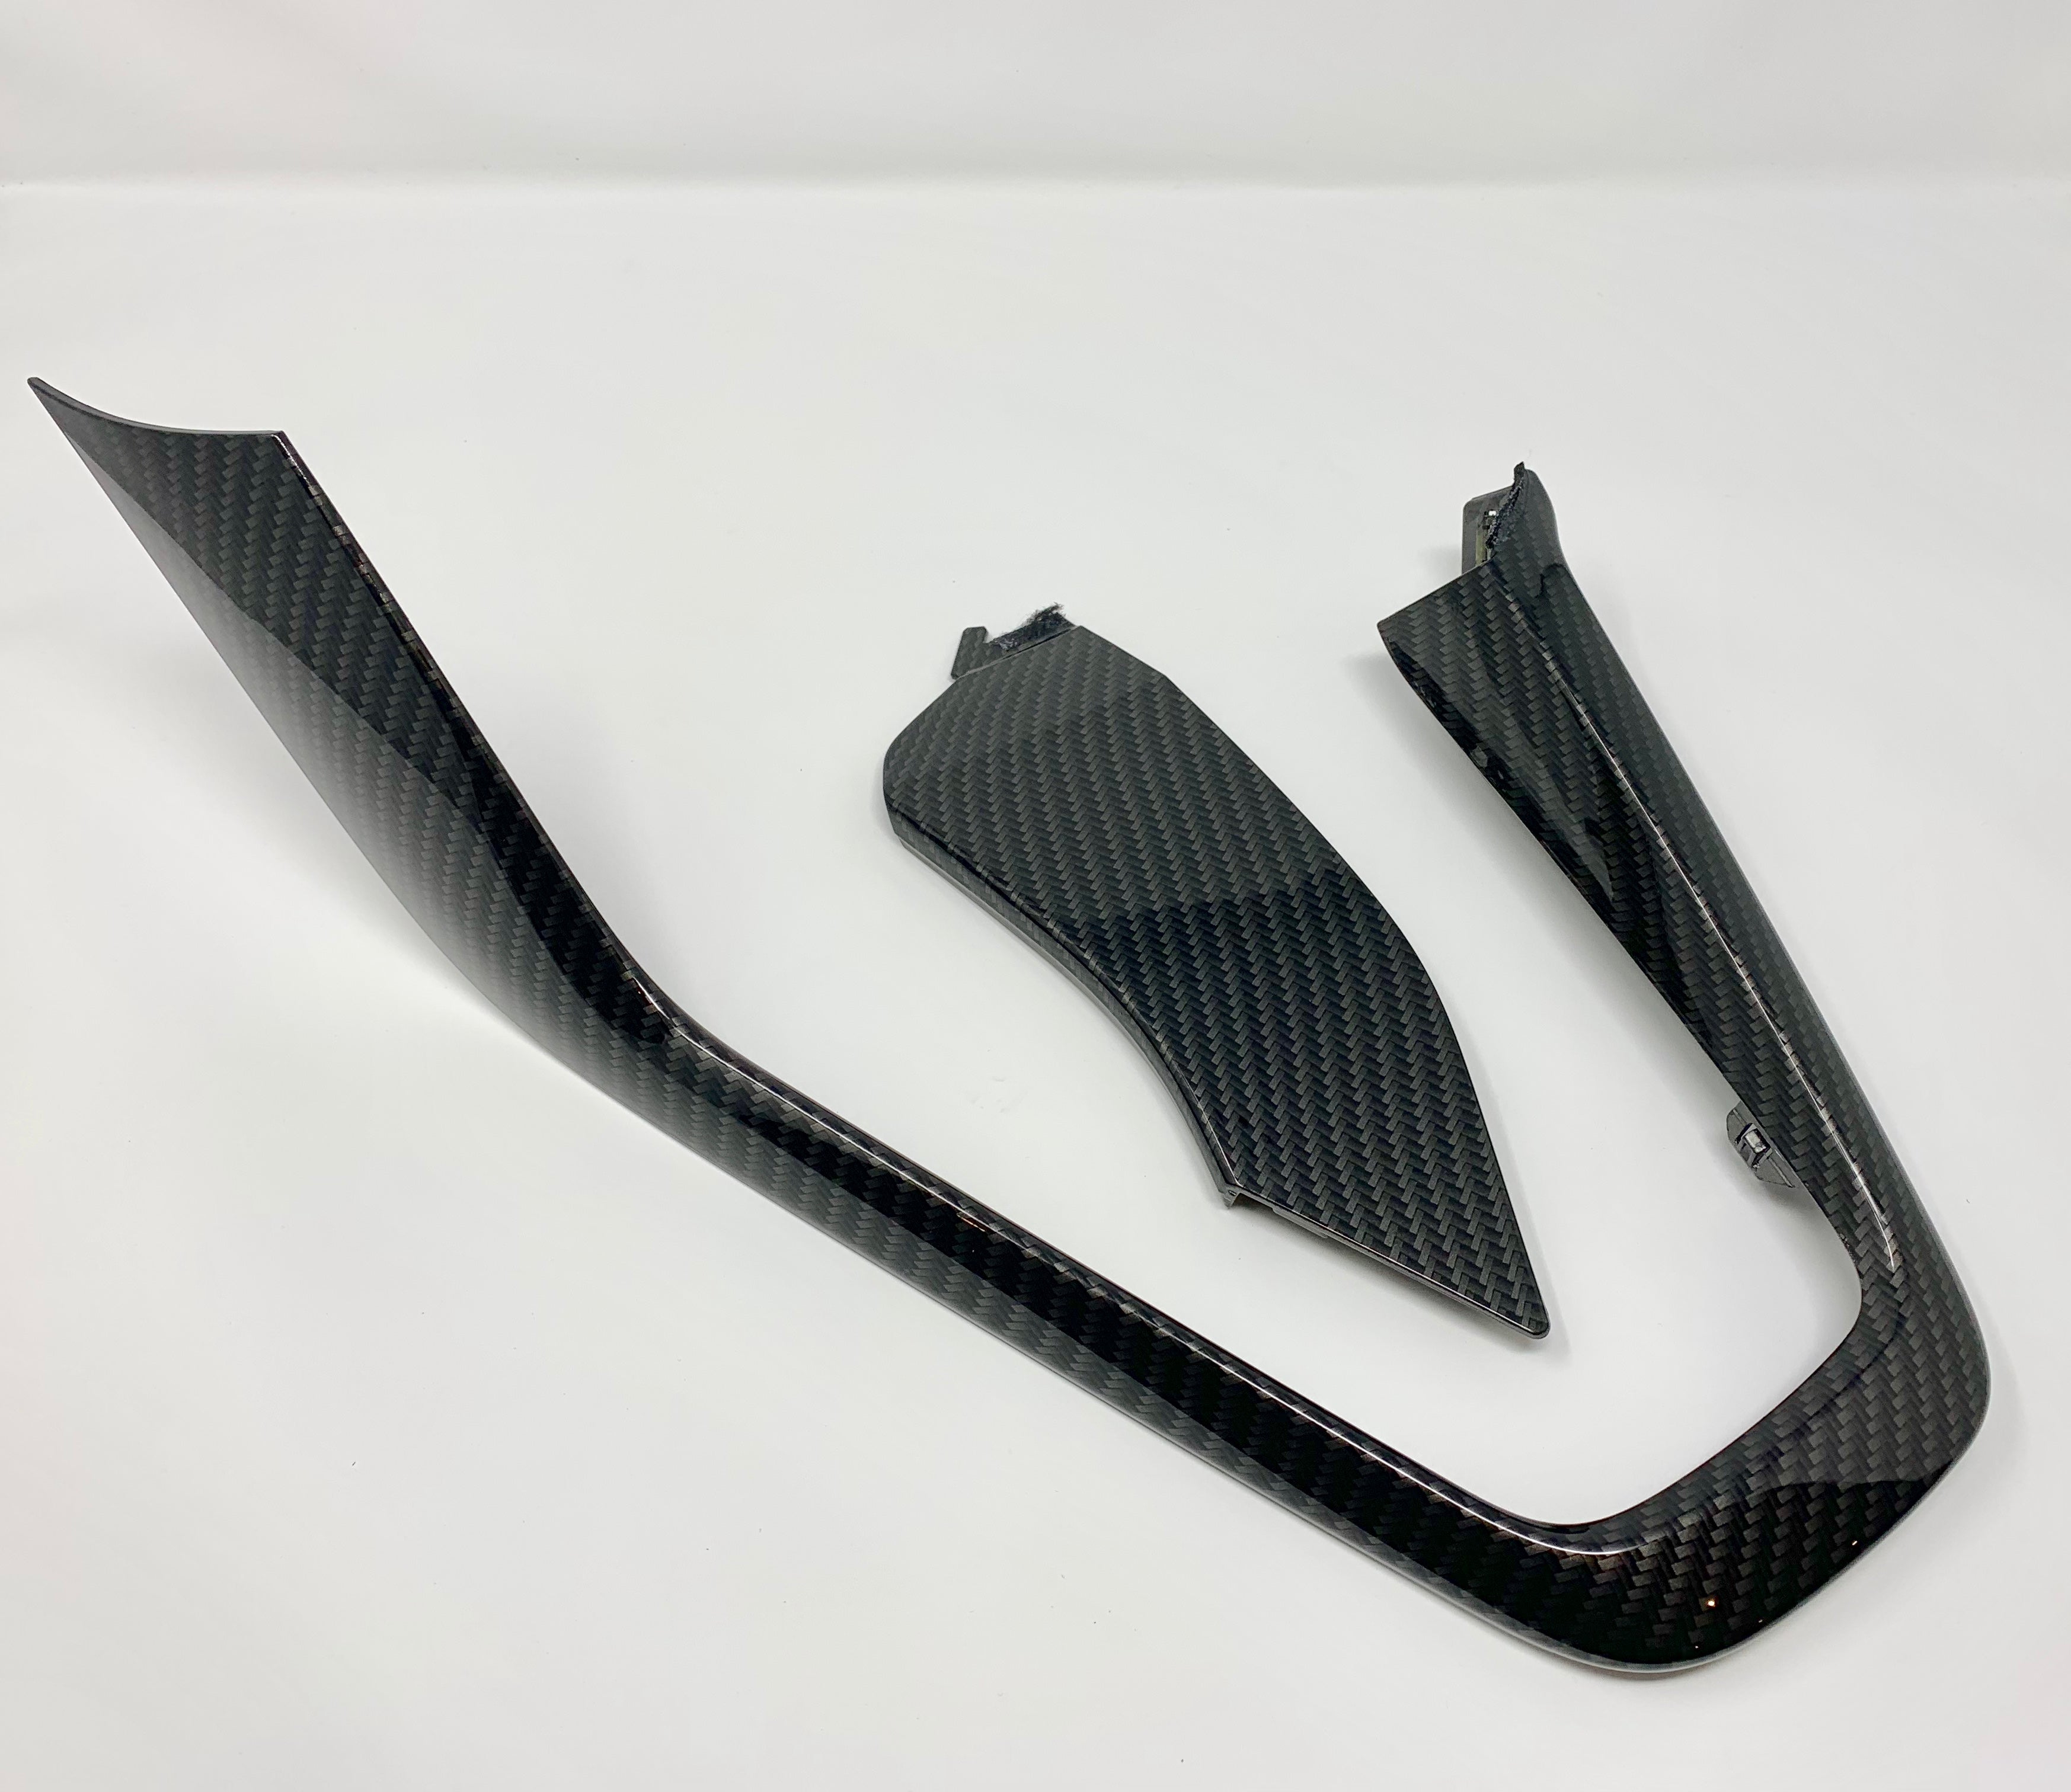 Genuine Ford Centre Console Edge Trim and Side Return - MK3.5 Focus (Painted/Hydrodipped Finishes)